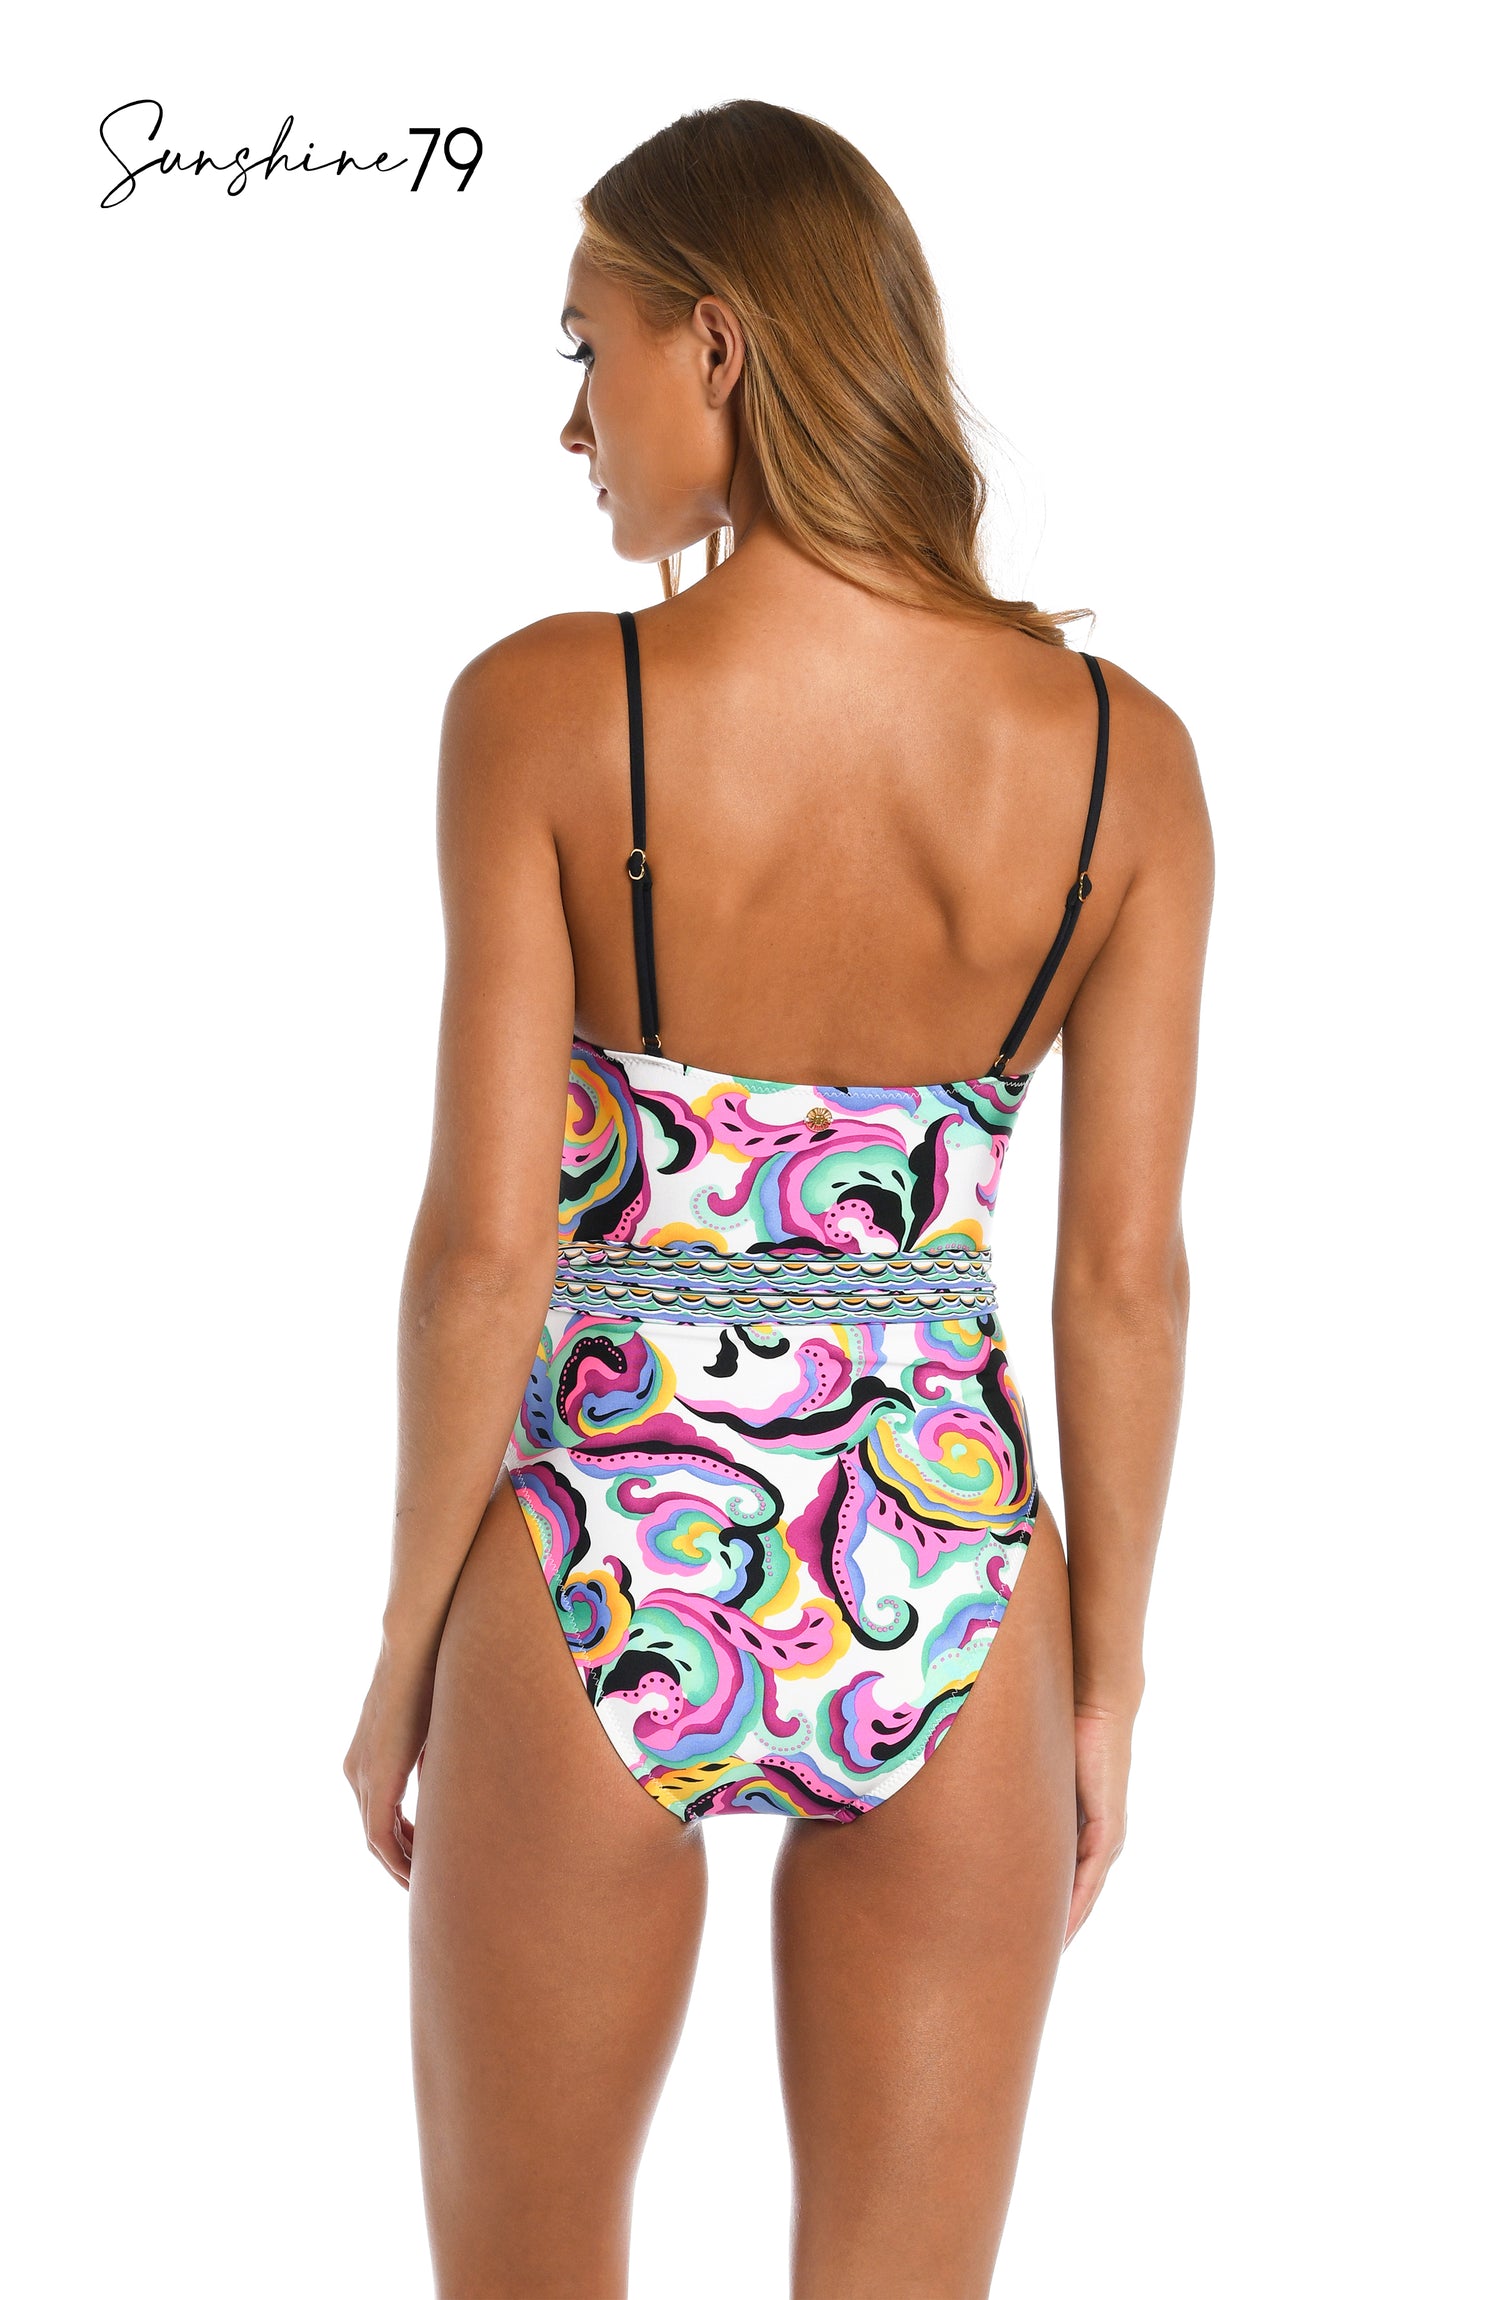 Model is wearing a multicolored swirl printed over the shoulder one piece from our Sunshine 79 brand.